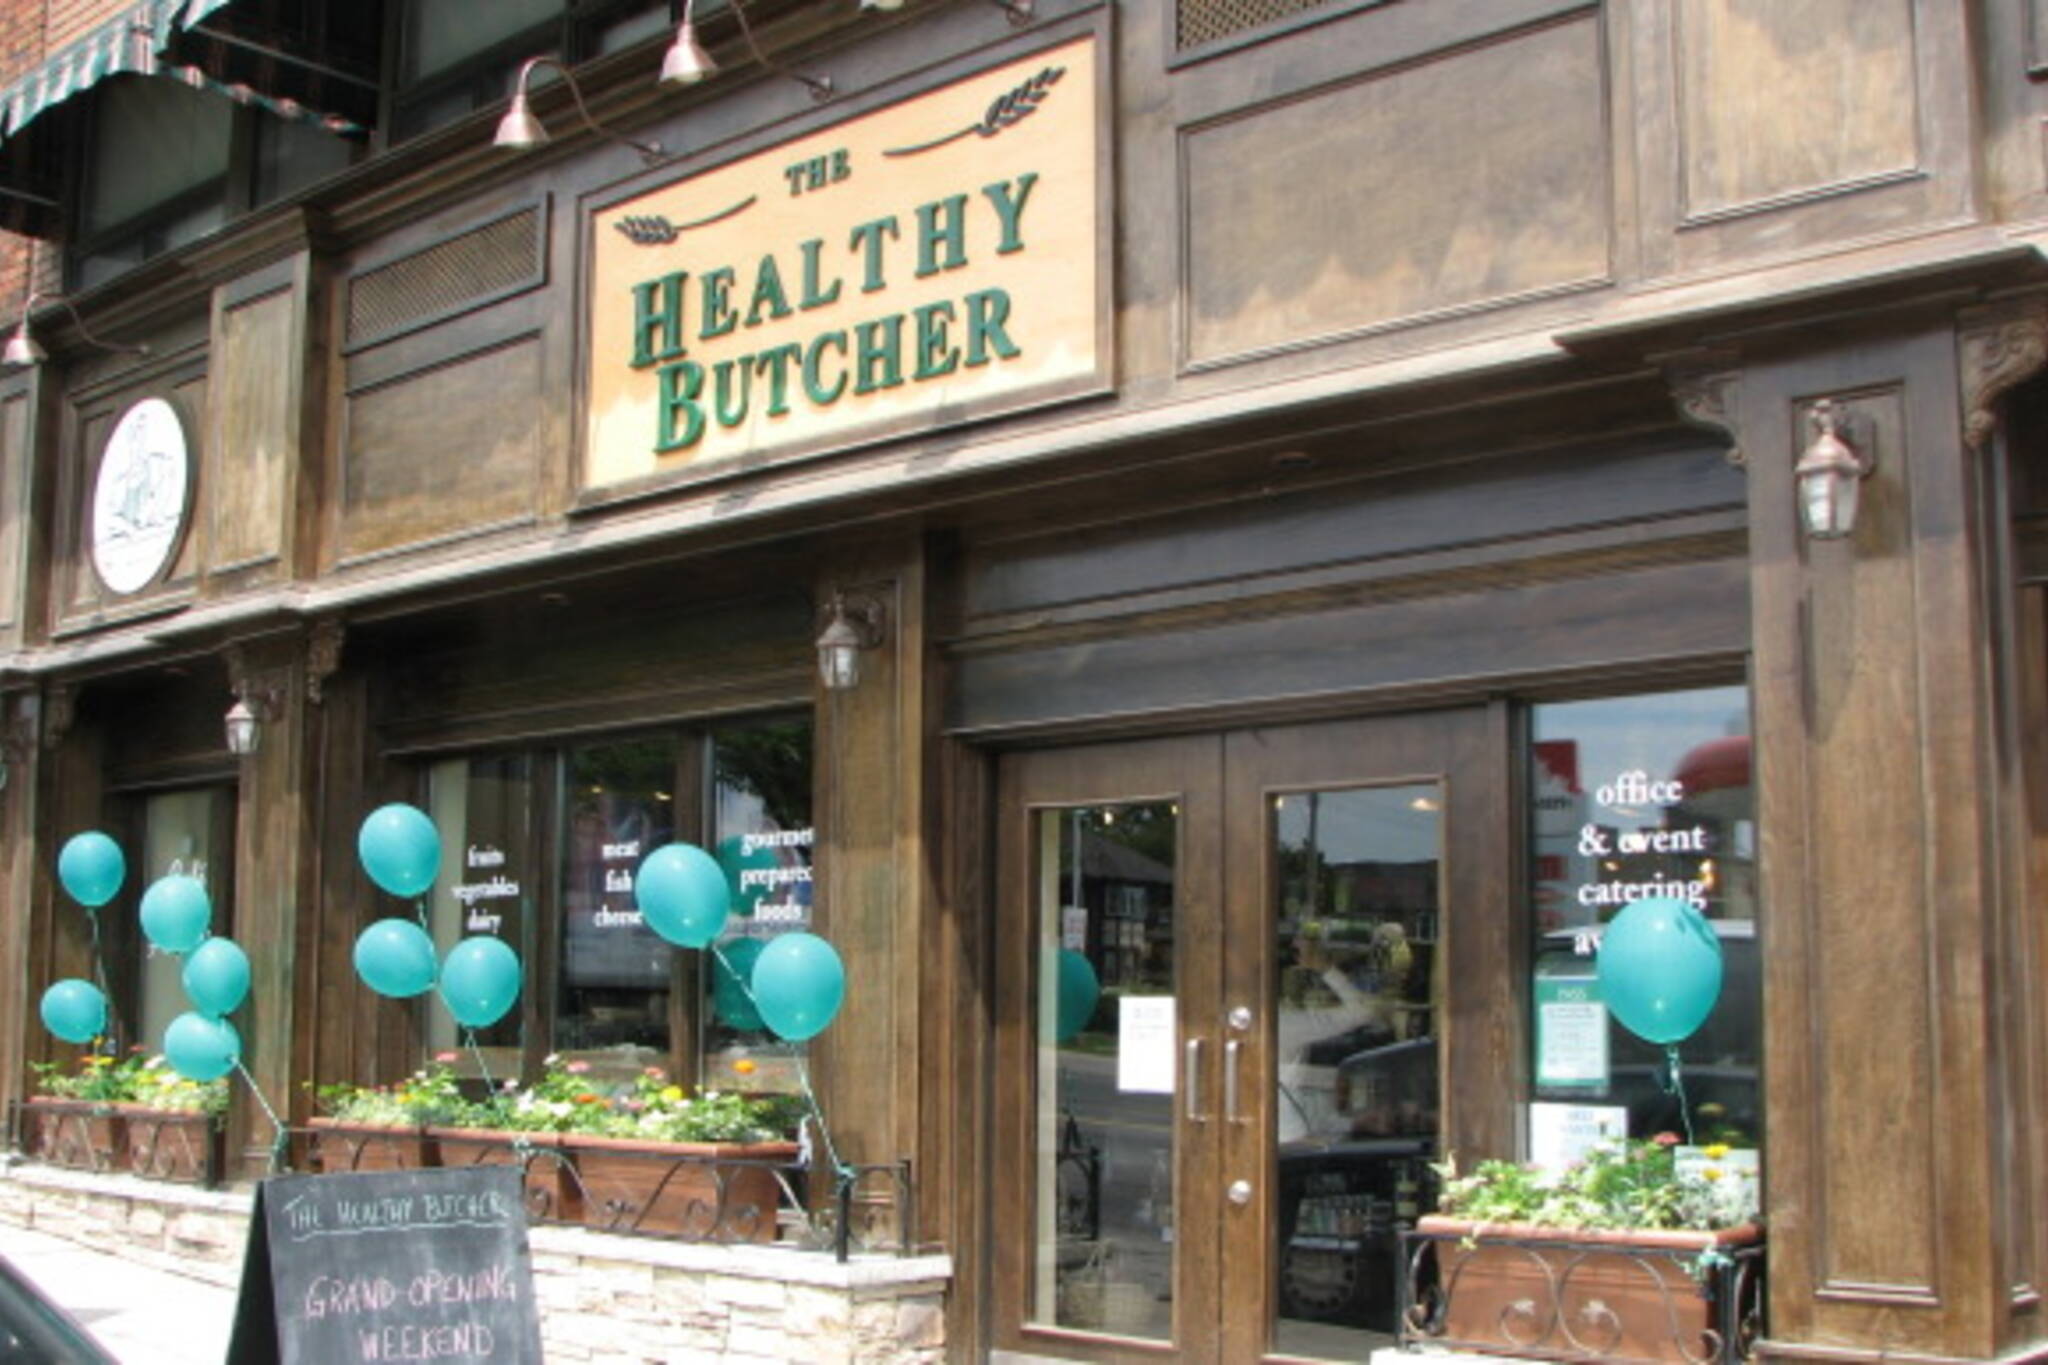 The Healthy Butcher